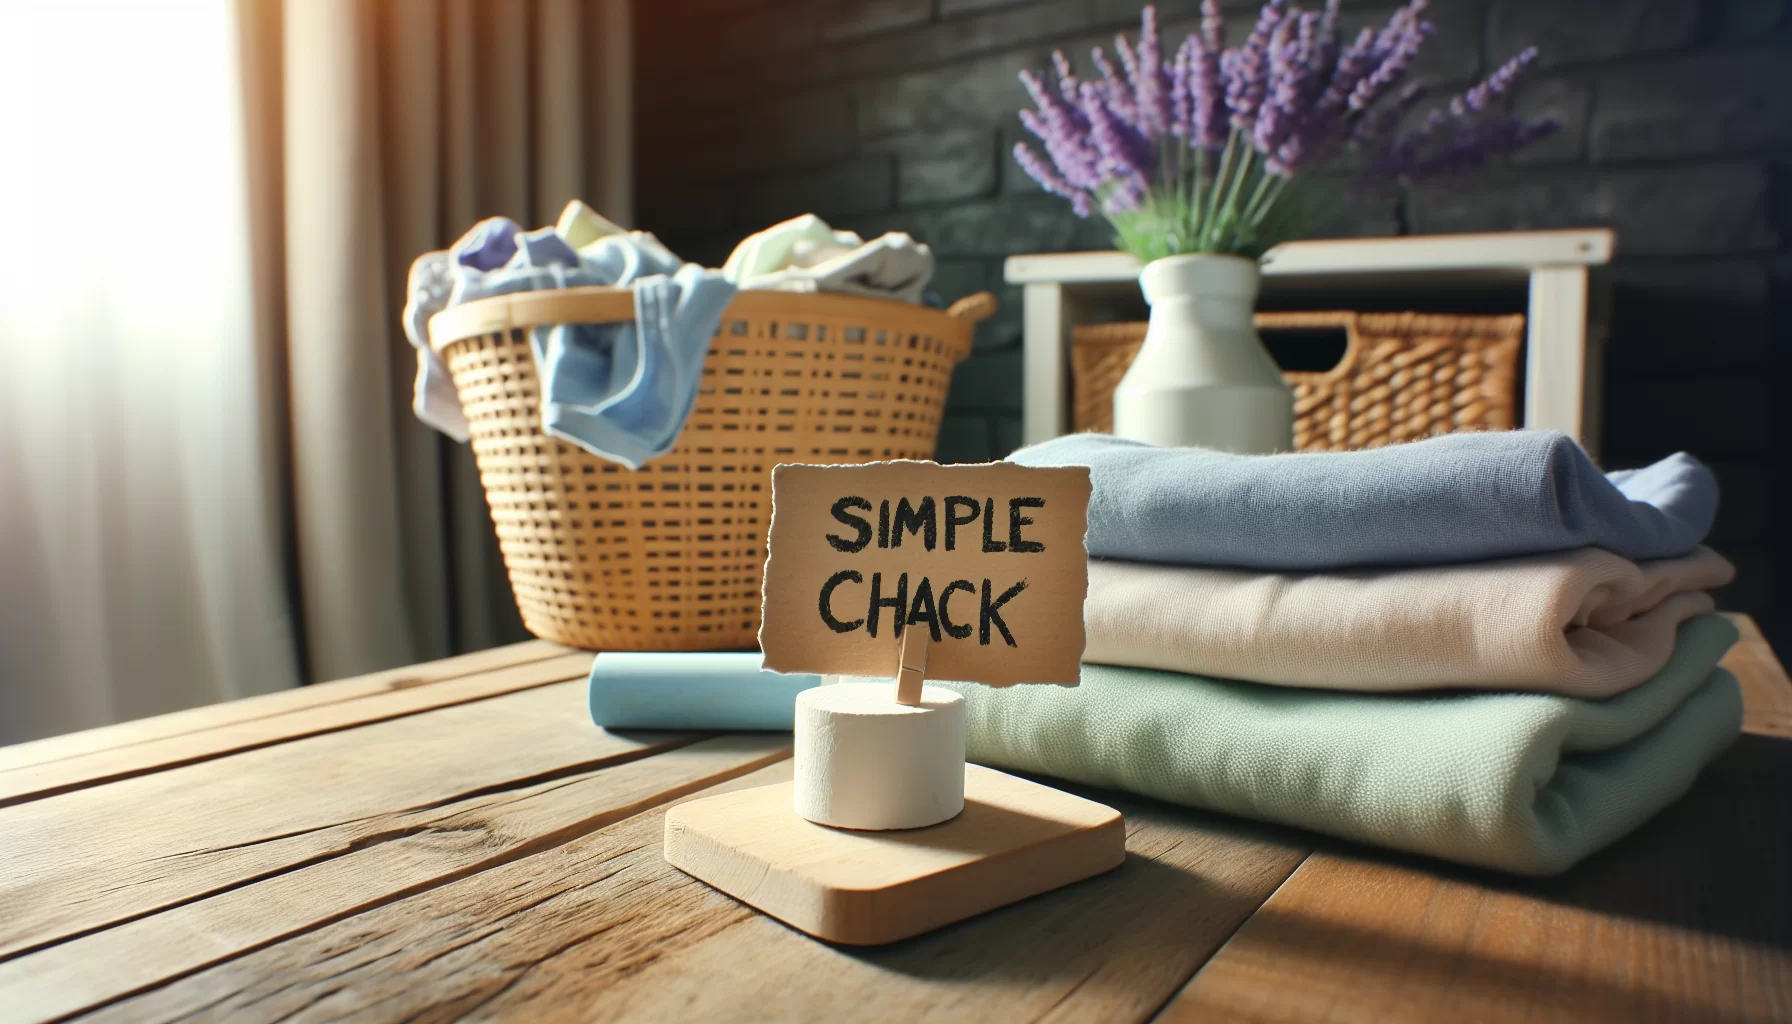 Get rid of laundry smells easily with this chalk hack, cheap and eco-friendly